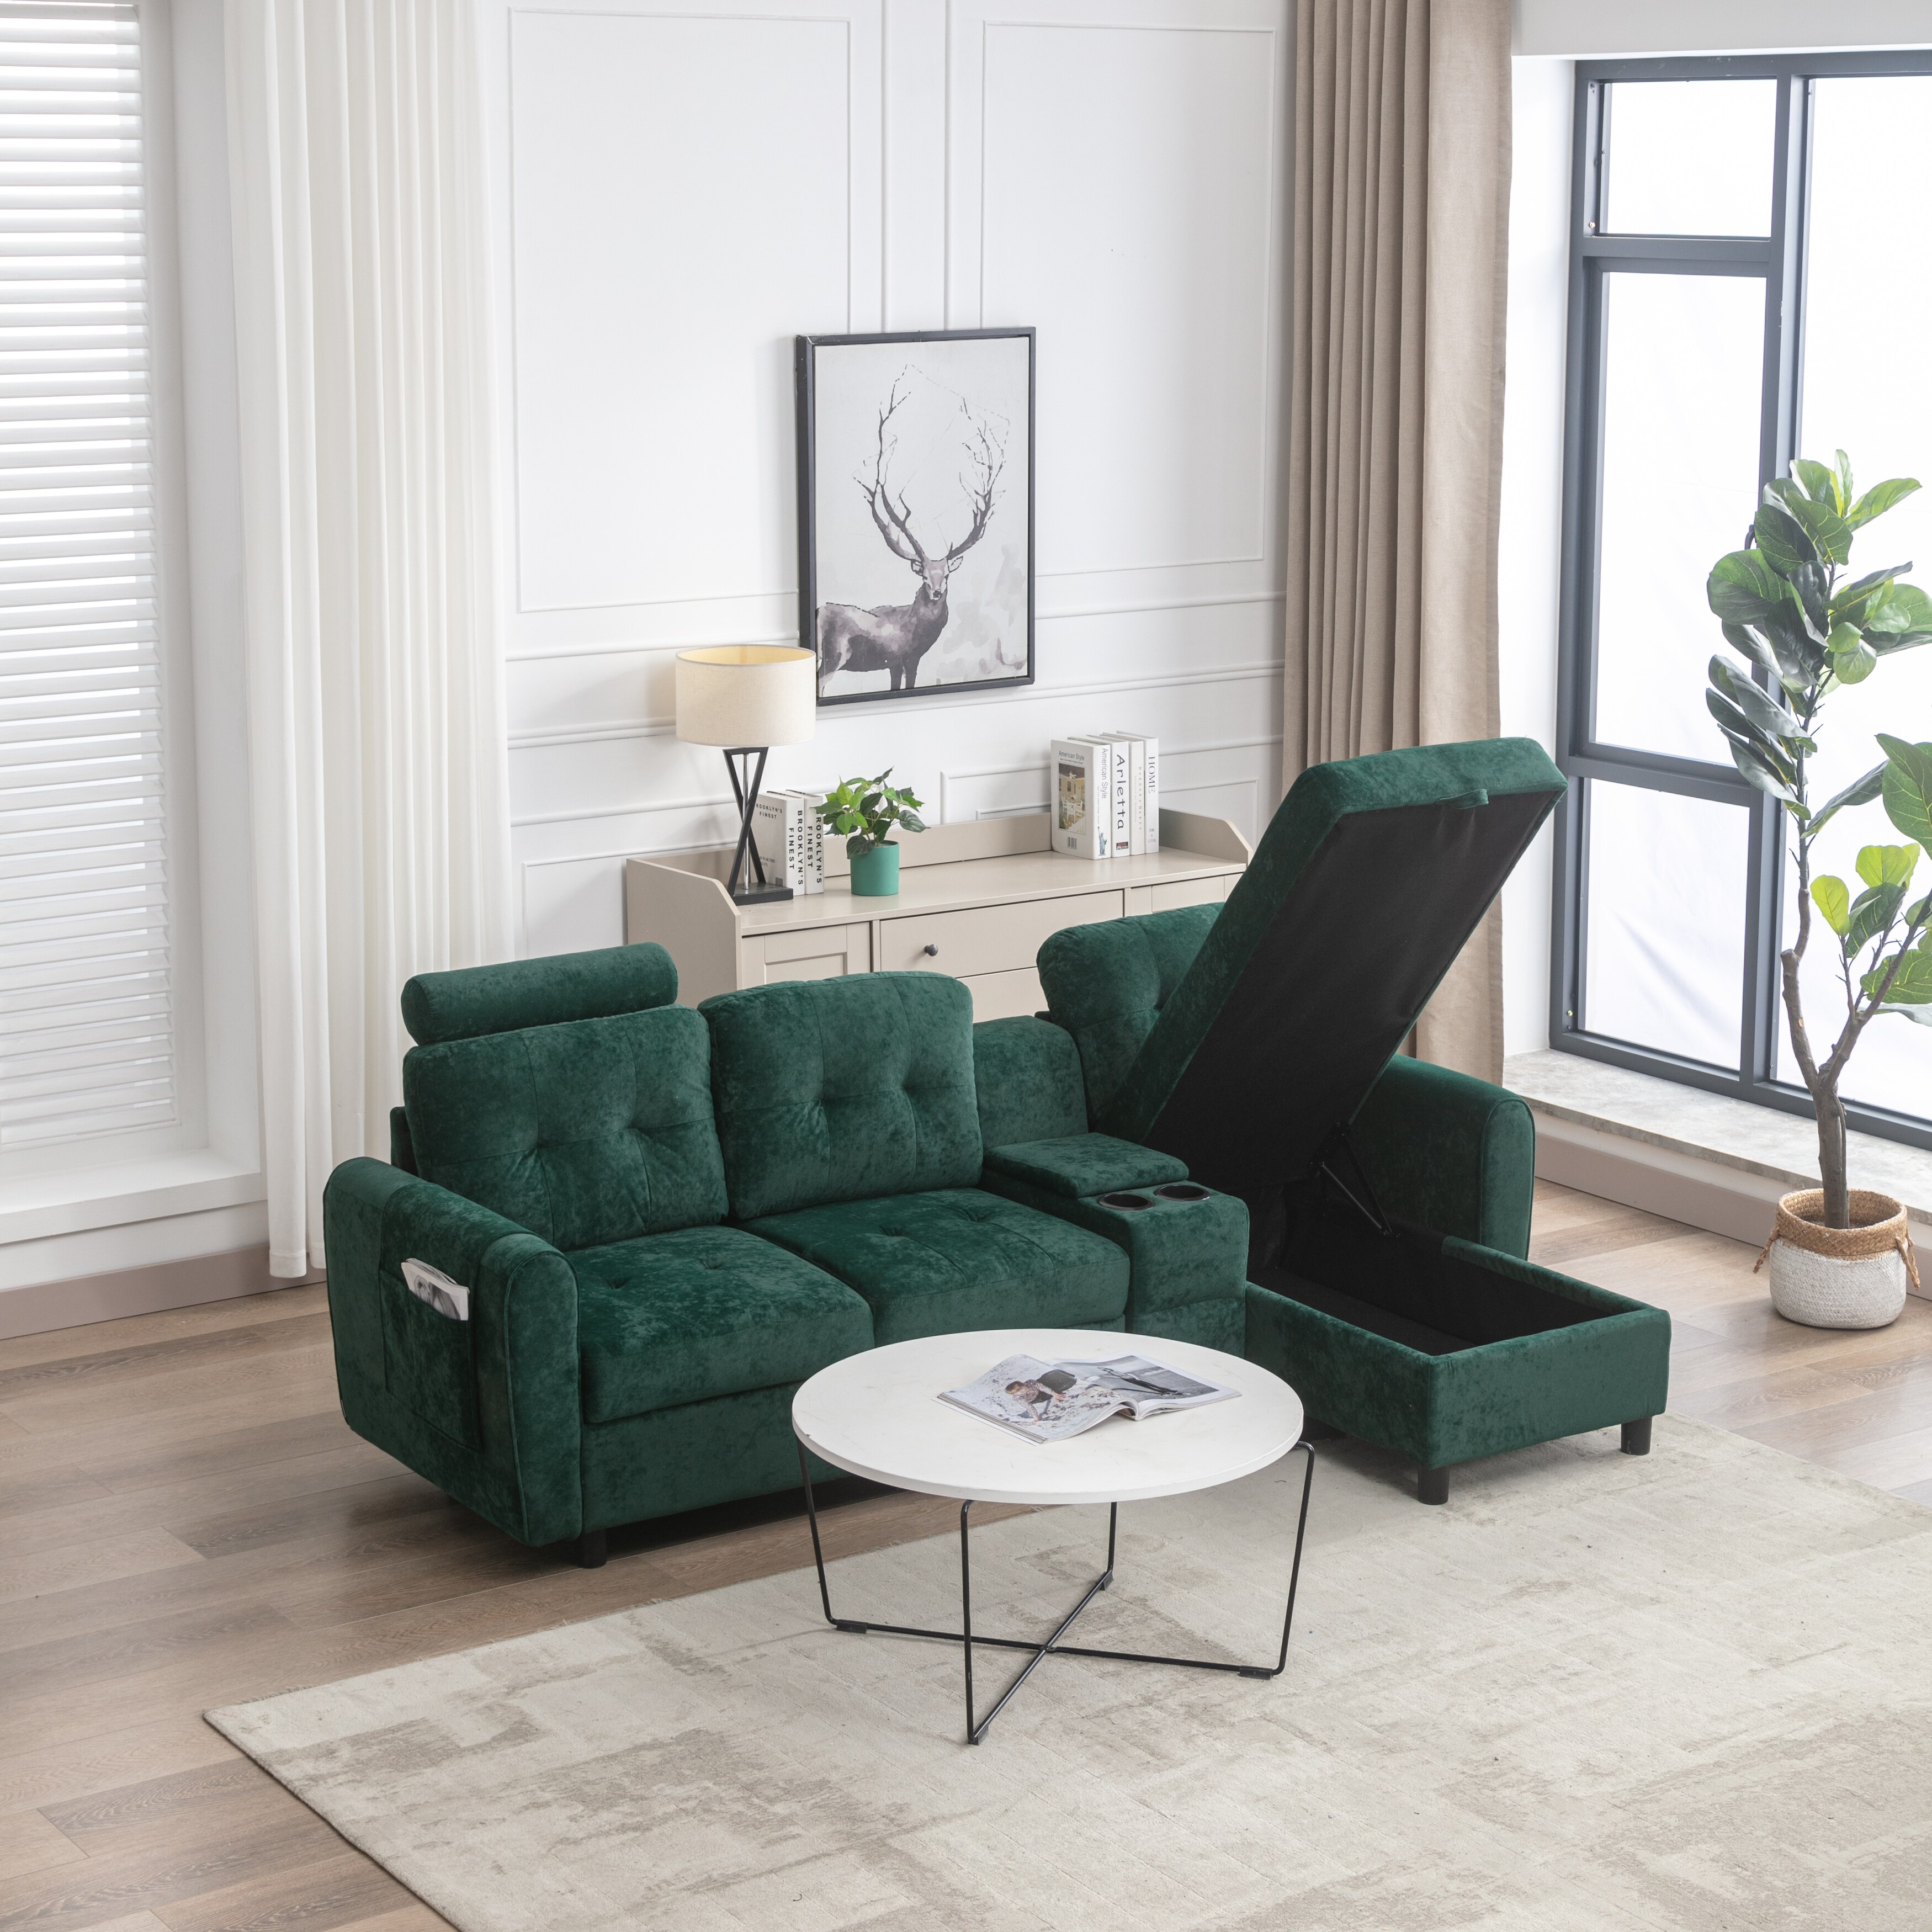 Emerald L-shaped Sectional Sofa Office 3-seat Sofa With Storage Seats